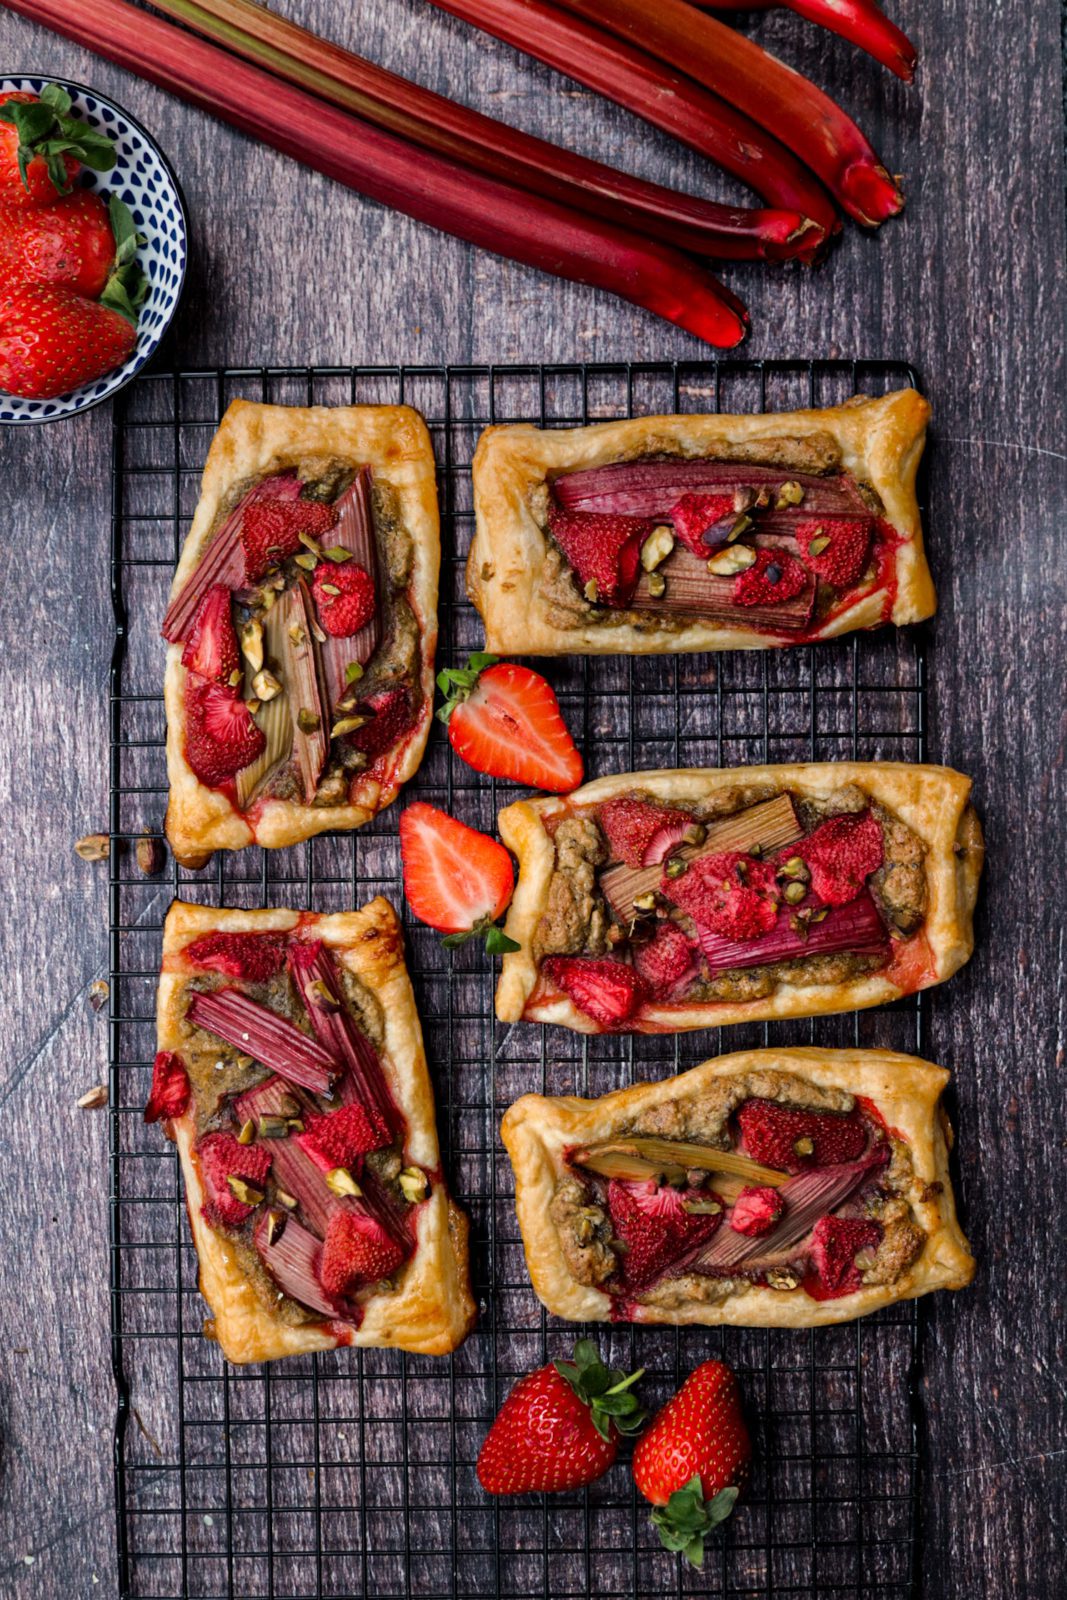 Strawberry-Rhubarb Pastry Tarts filled with almond frangipane